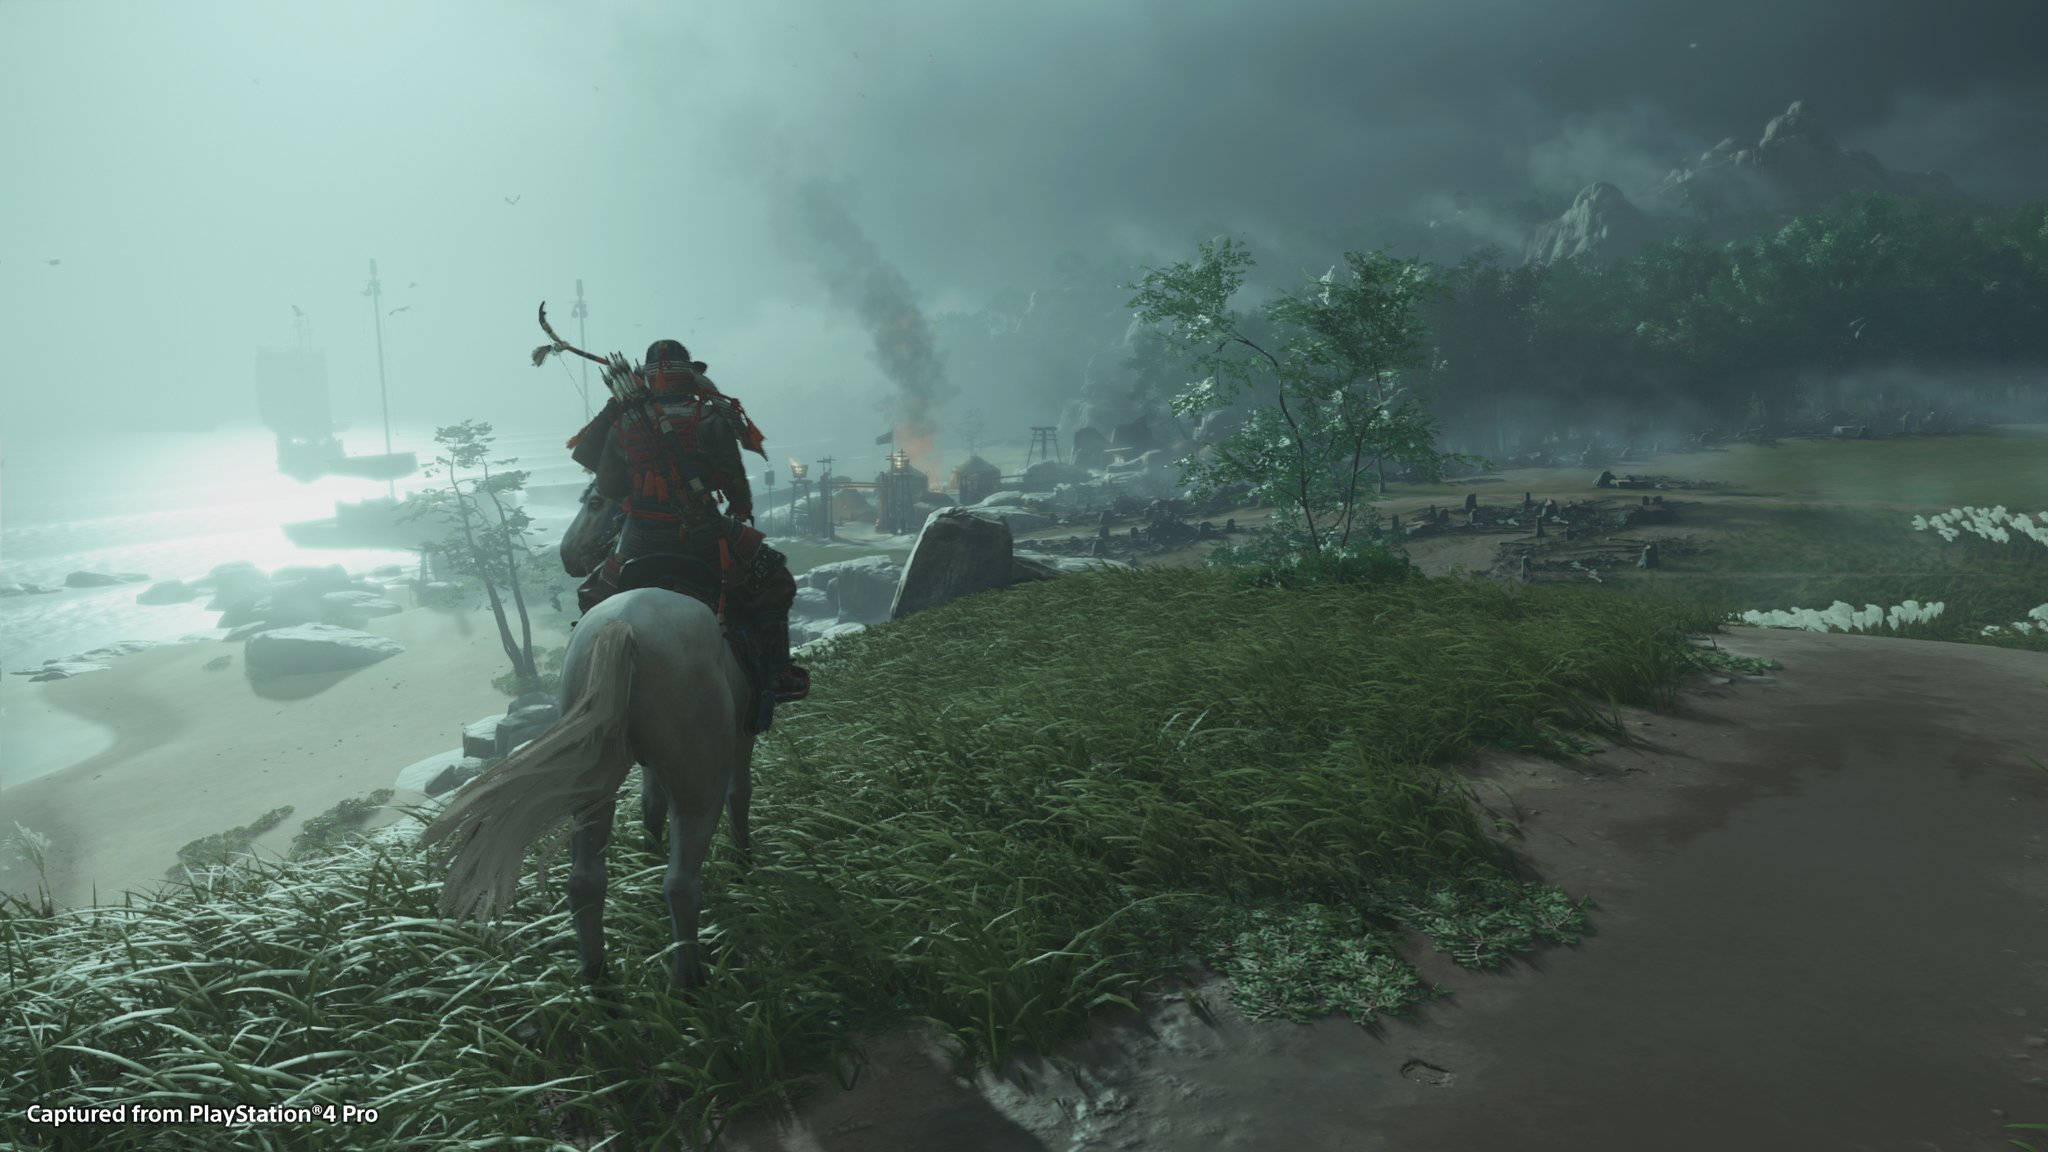 Ghost of Tsushima Creative Director says combat is very